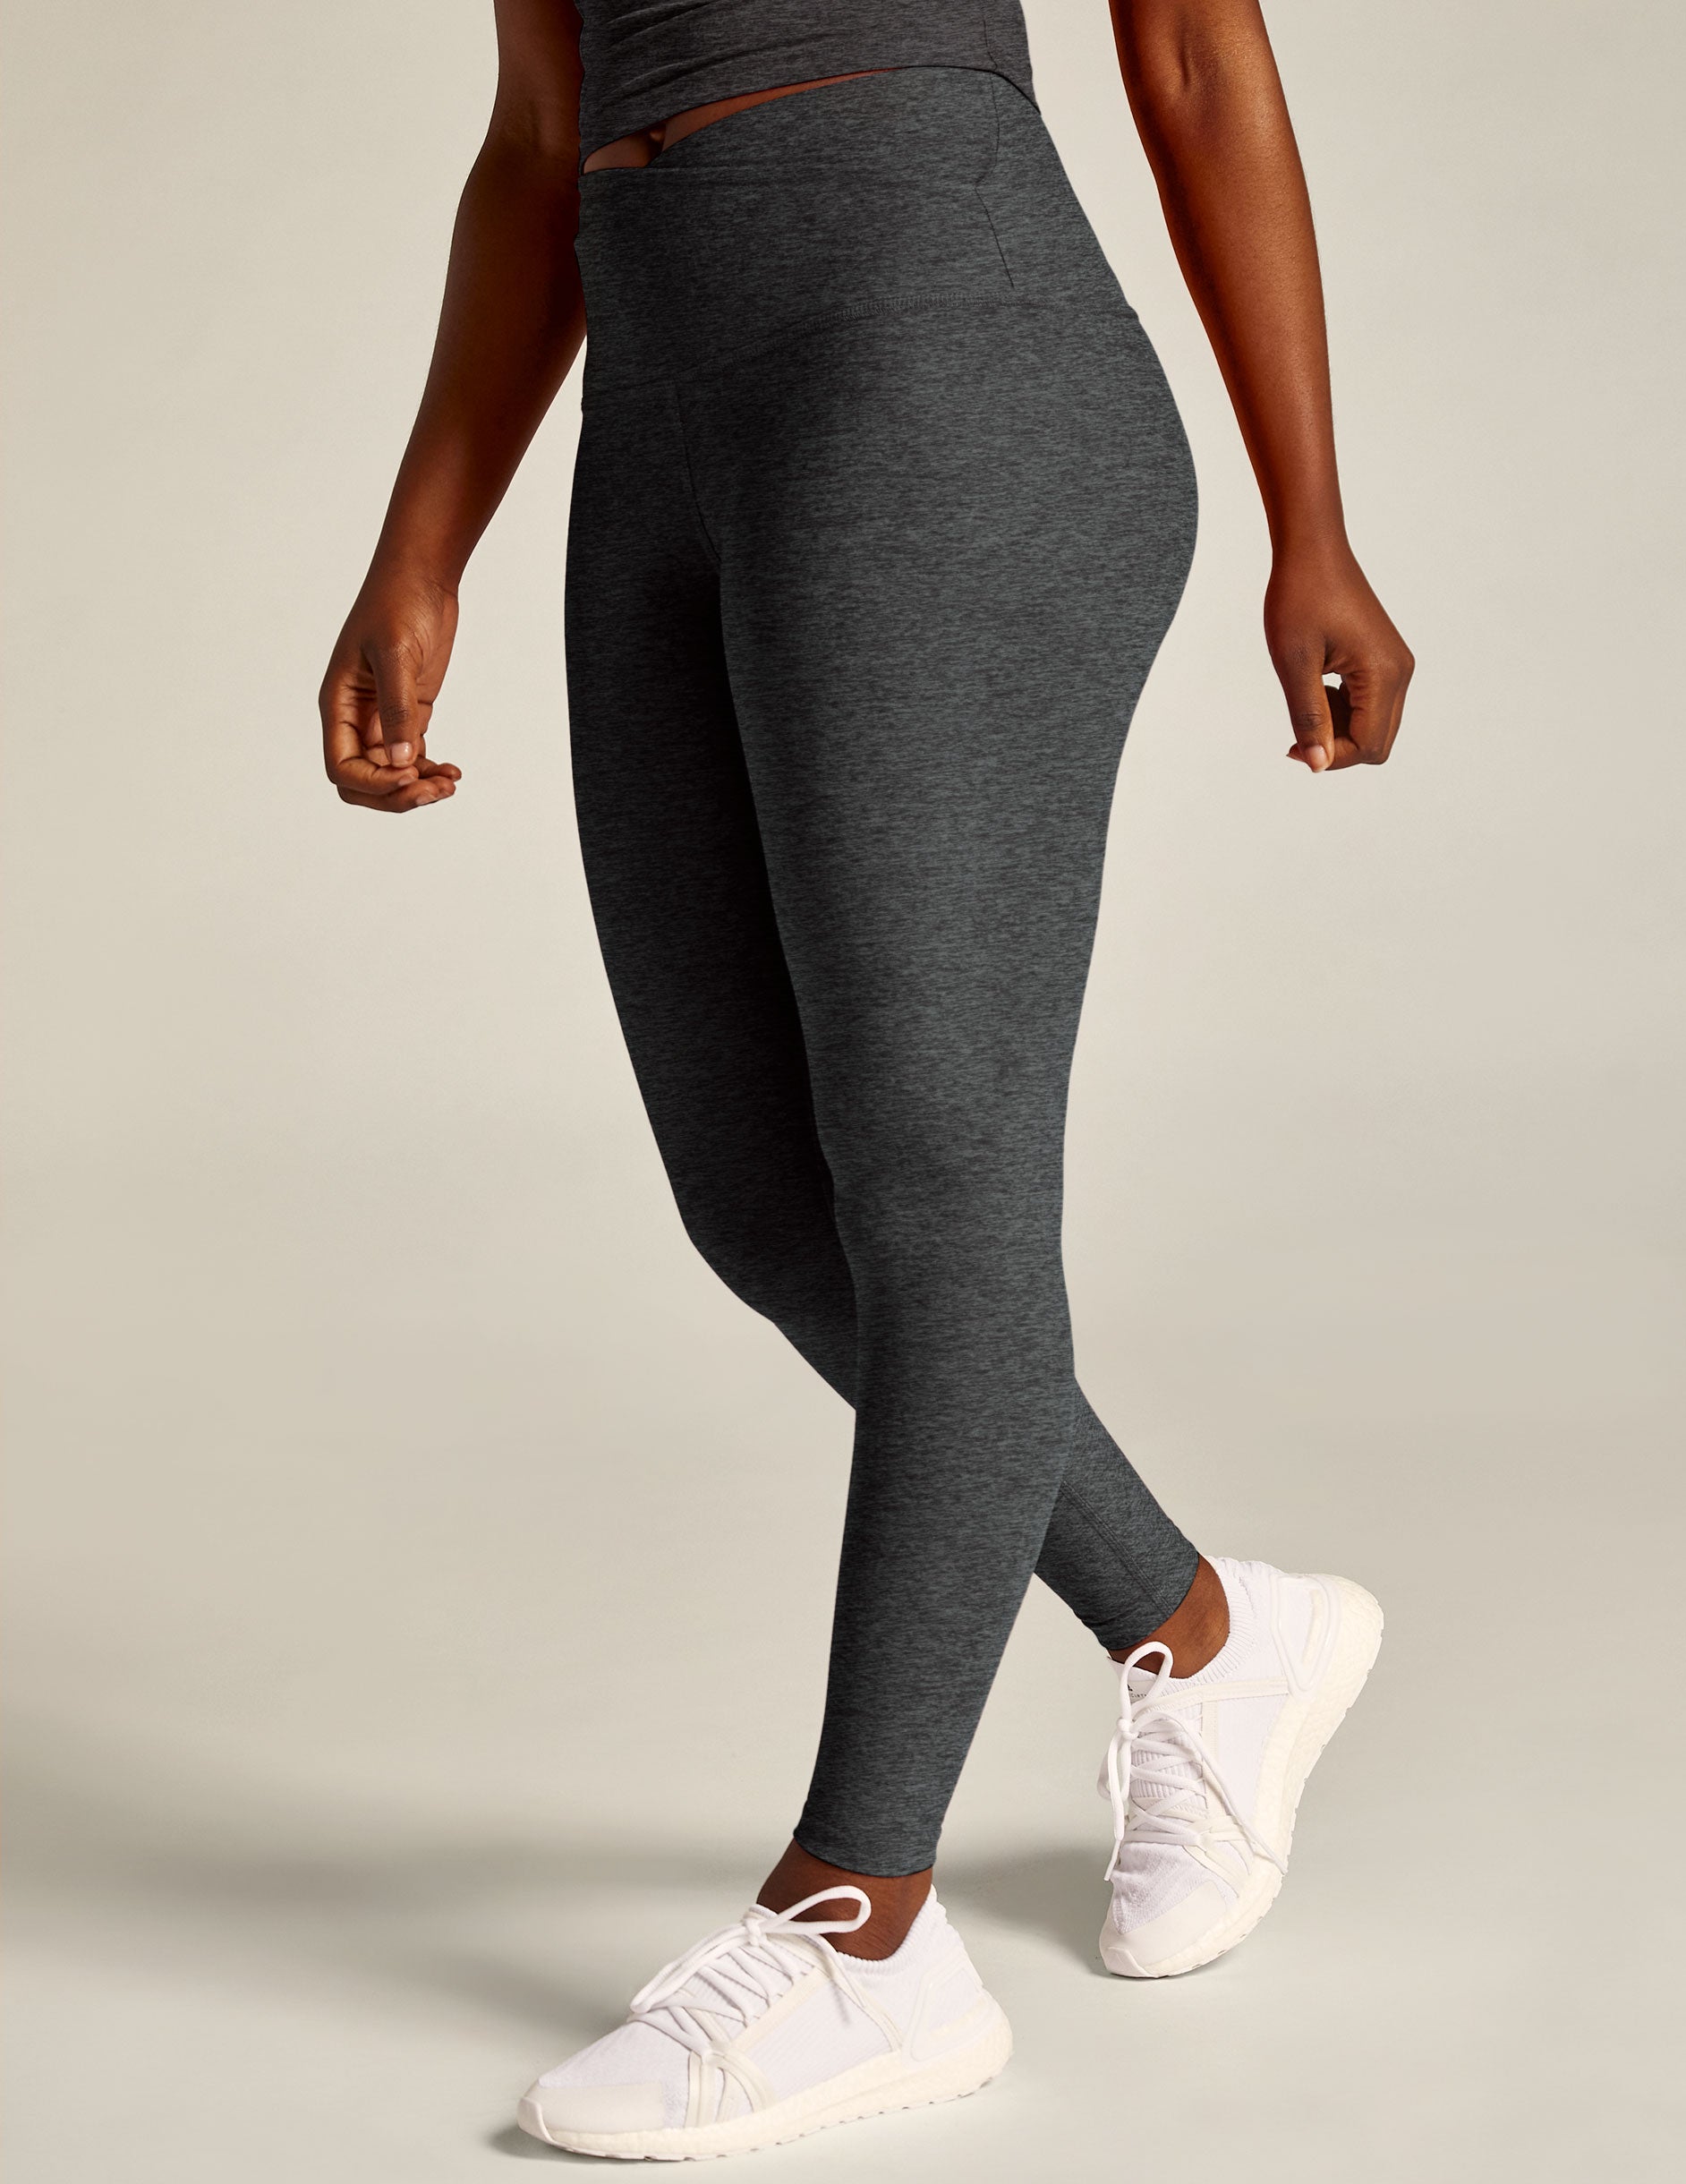 Charcoal Rib High Waisted Leggings, Two Piece Sets